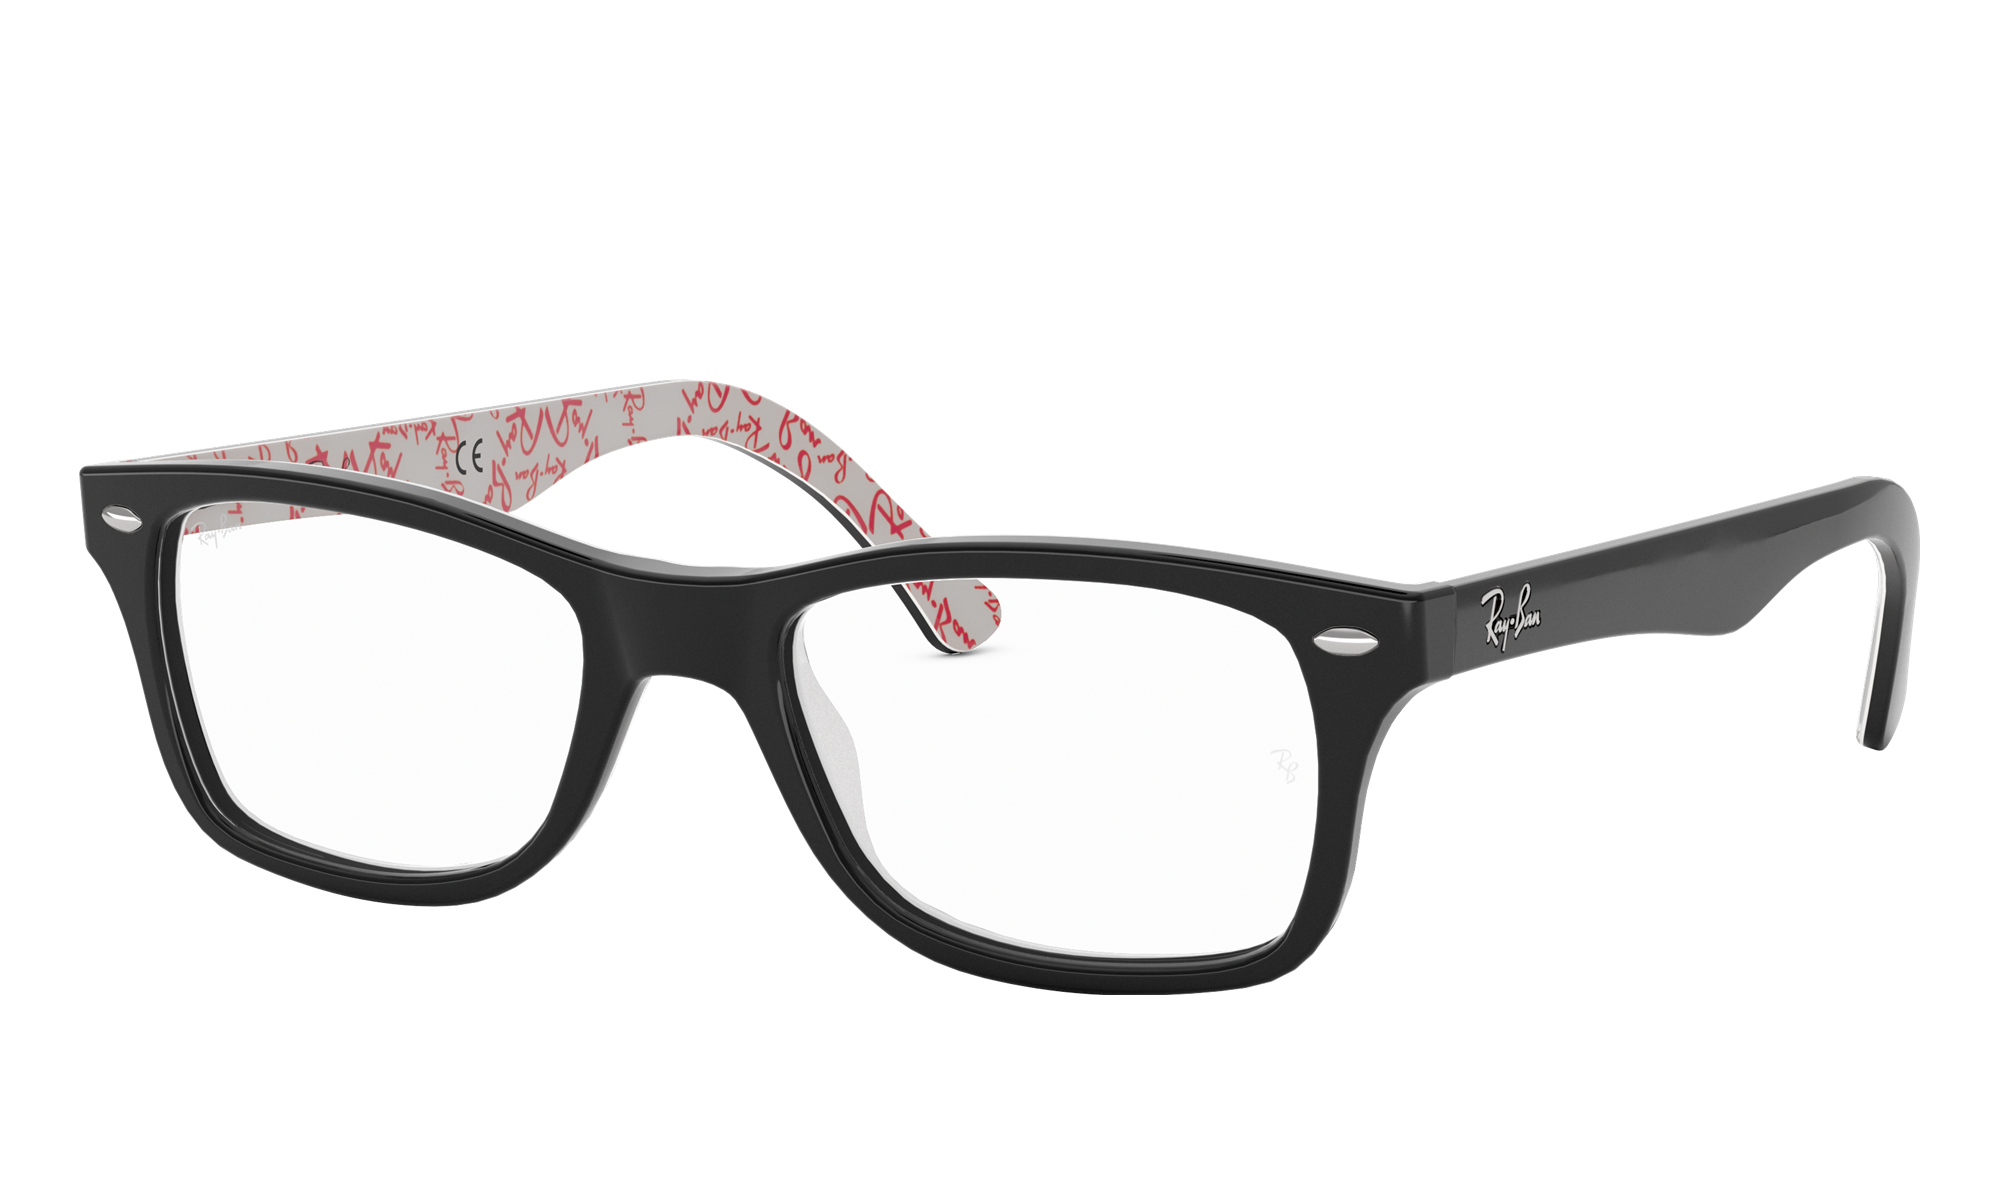 Ray-Ban Unisex Rx5228 Black On White Size: Extra Small